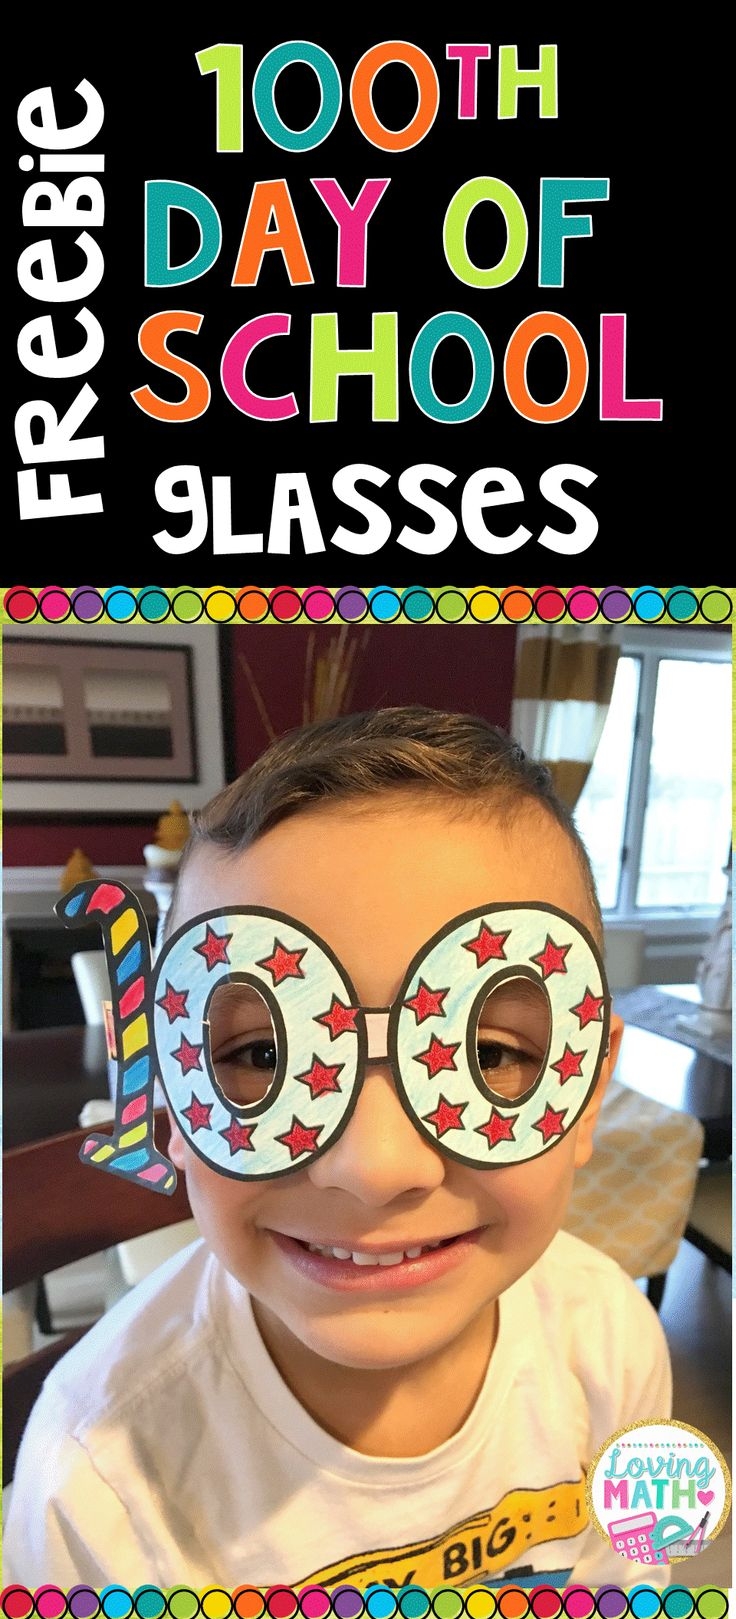 100th Day Of School Glasses FREEBIE 100th Day Of School Crafts 100 Days Of School 100 Day Celebration - 100th Day of School Printable Glasses Free